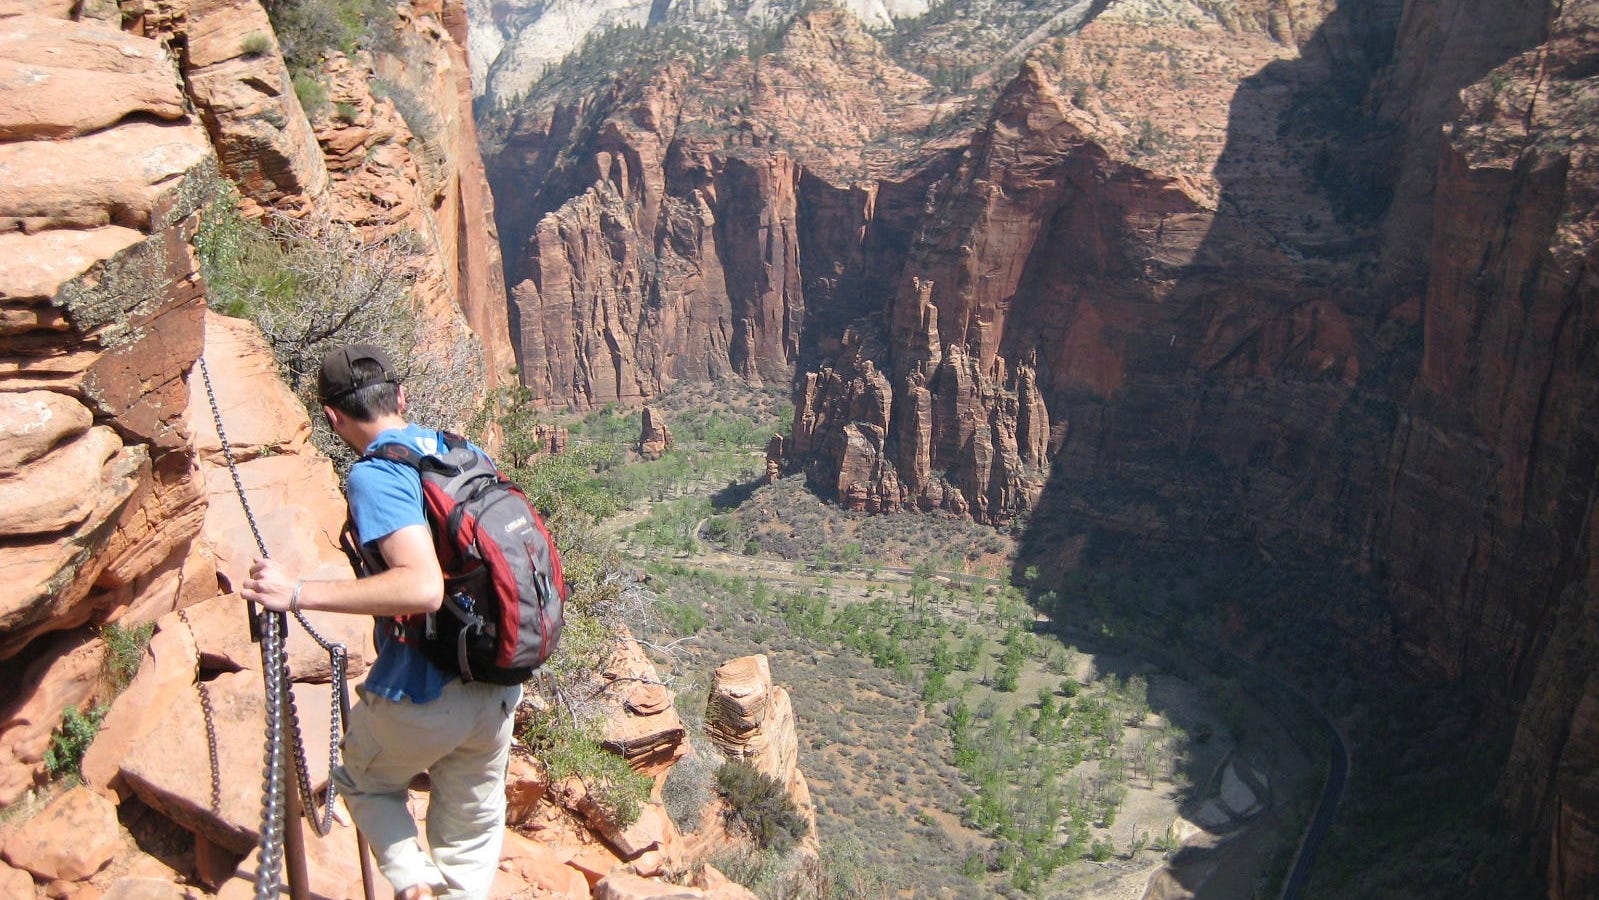 13 have died since 2000 on Angels Landing trail at Zion